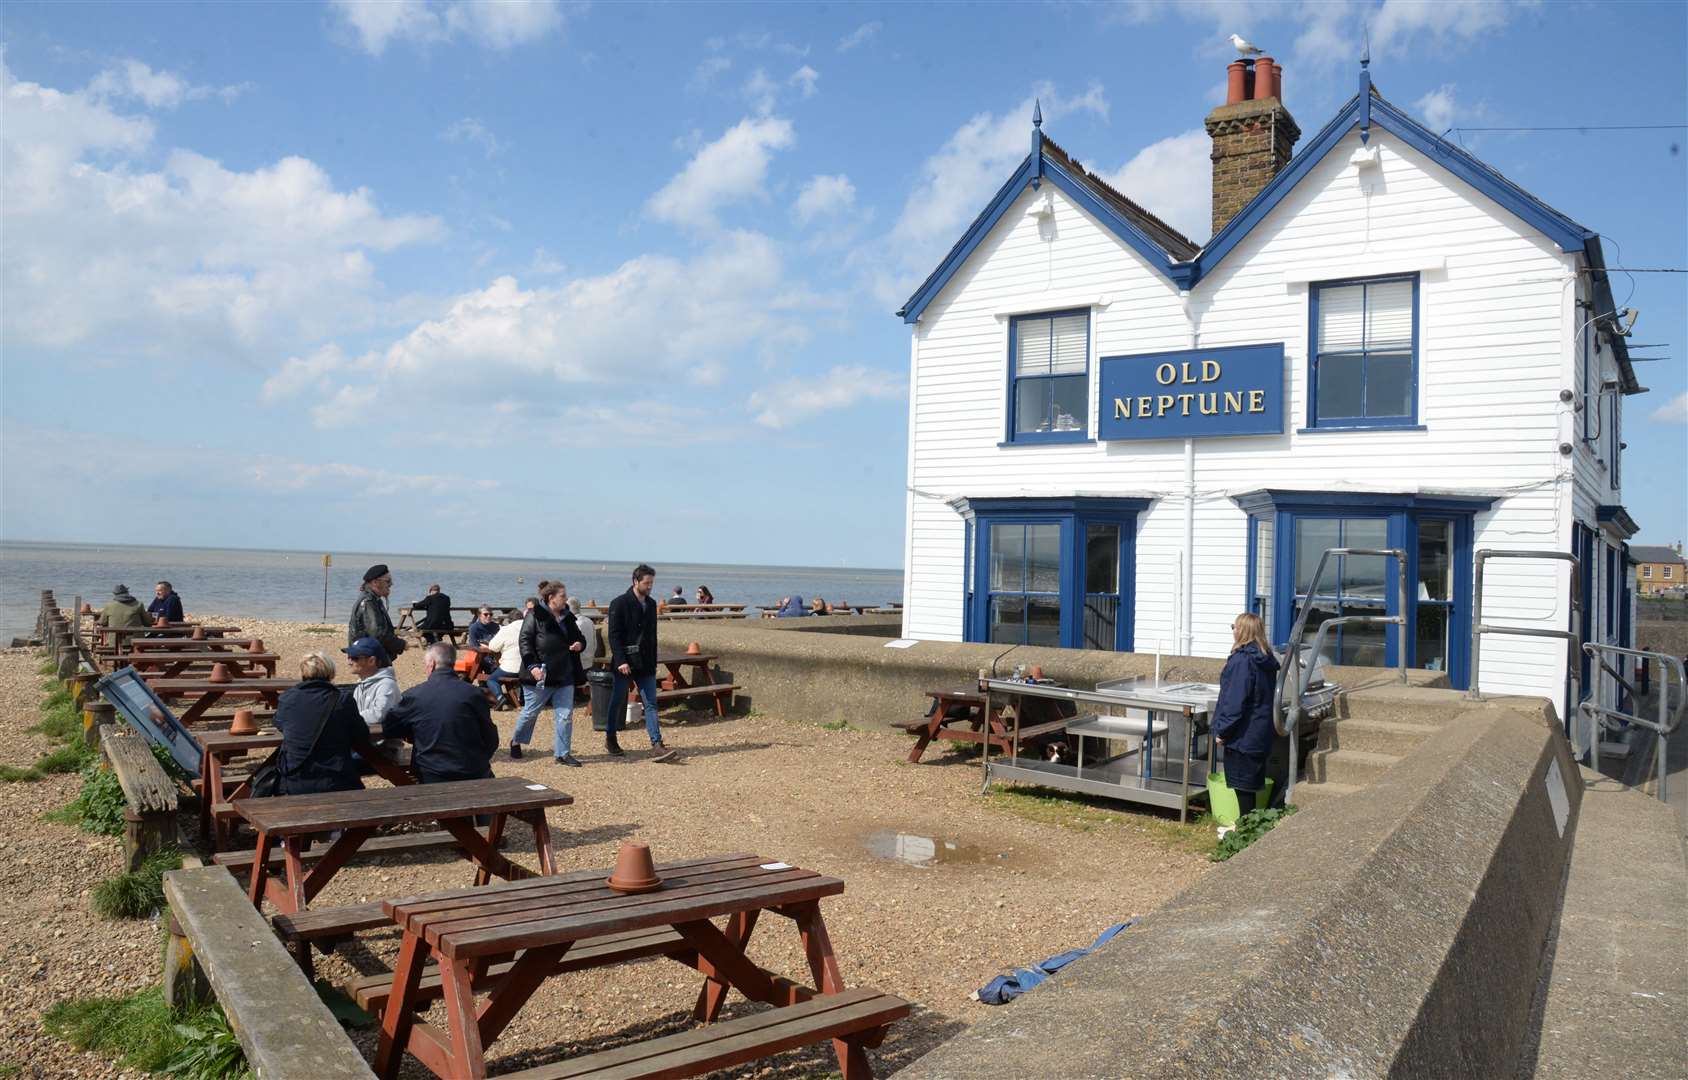 Right on the beach, this intimate Victorian inn with period decor offers pub-grub, plus live music and Sheps ales